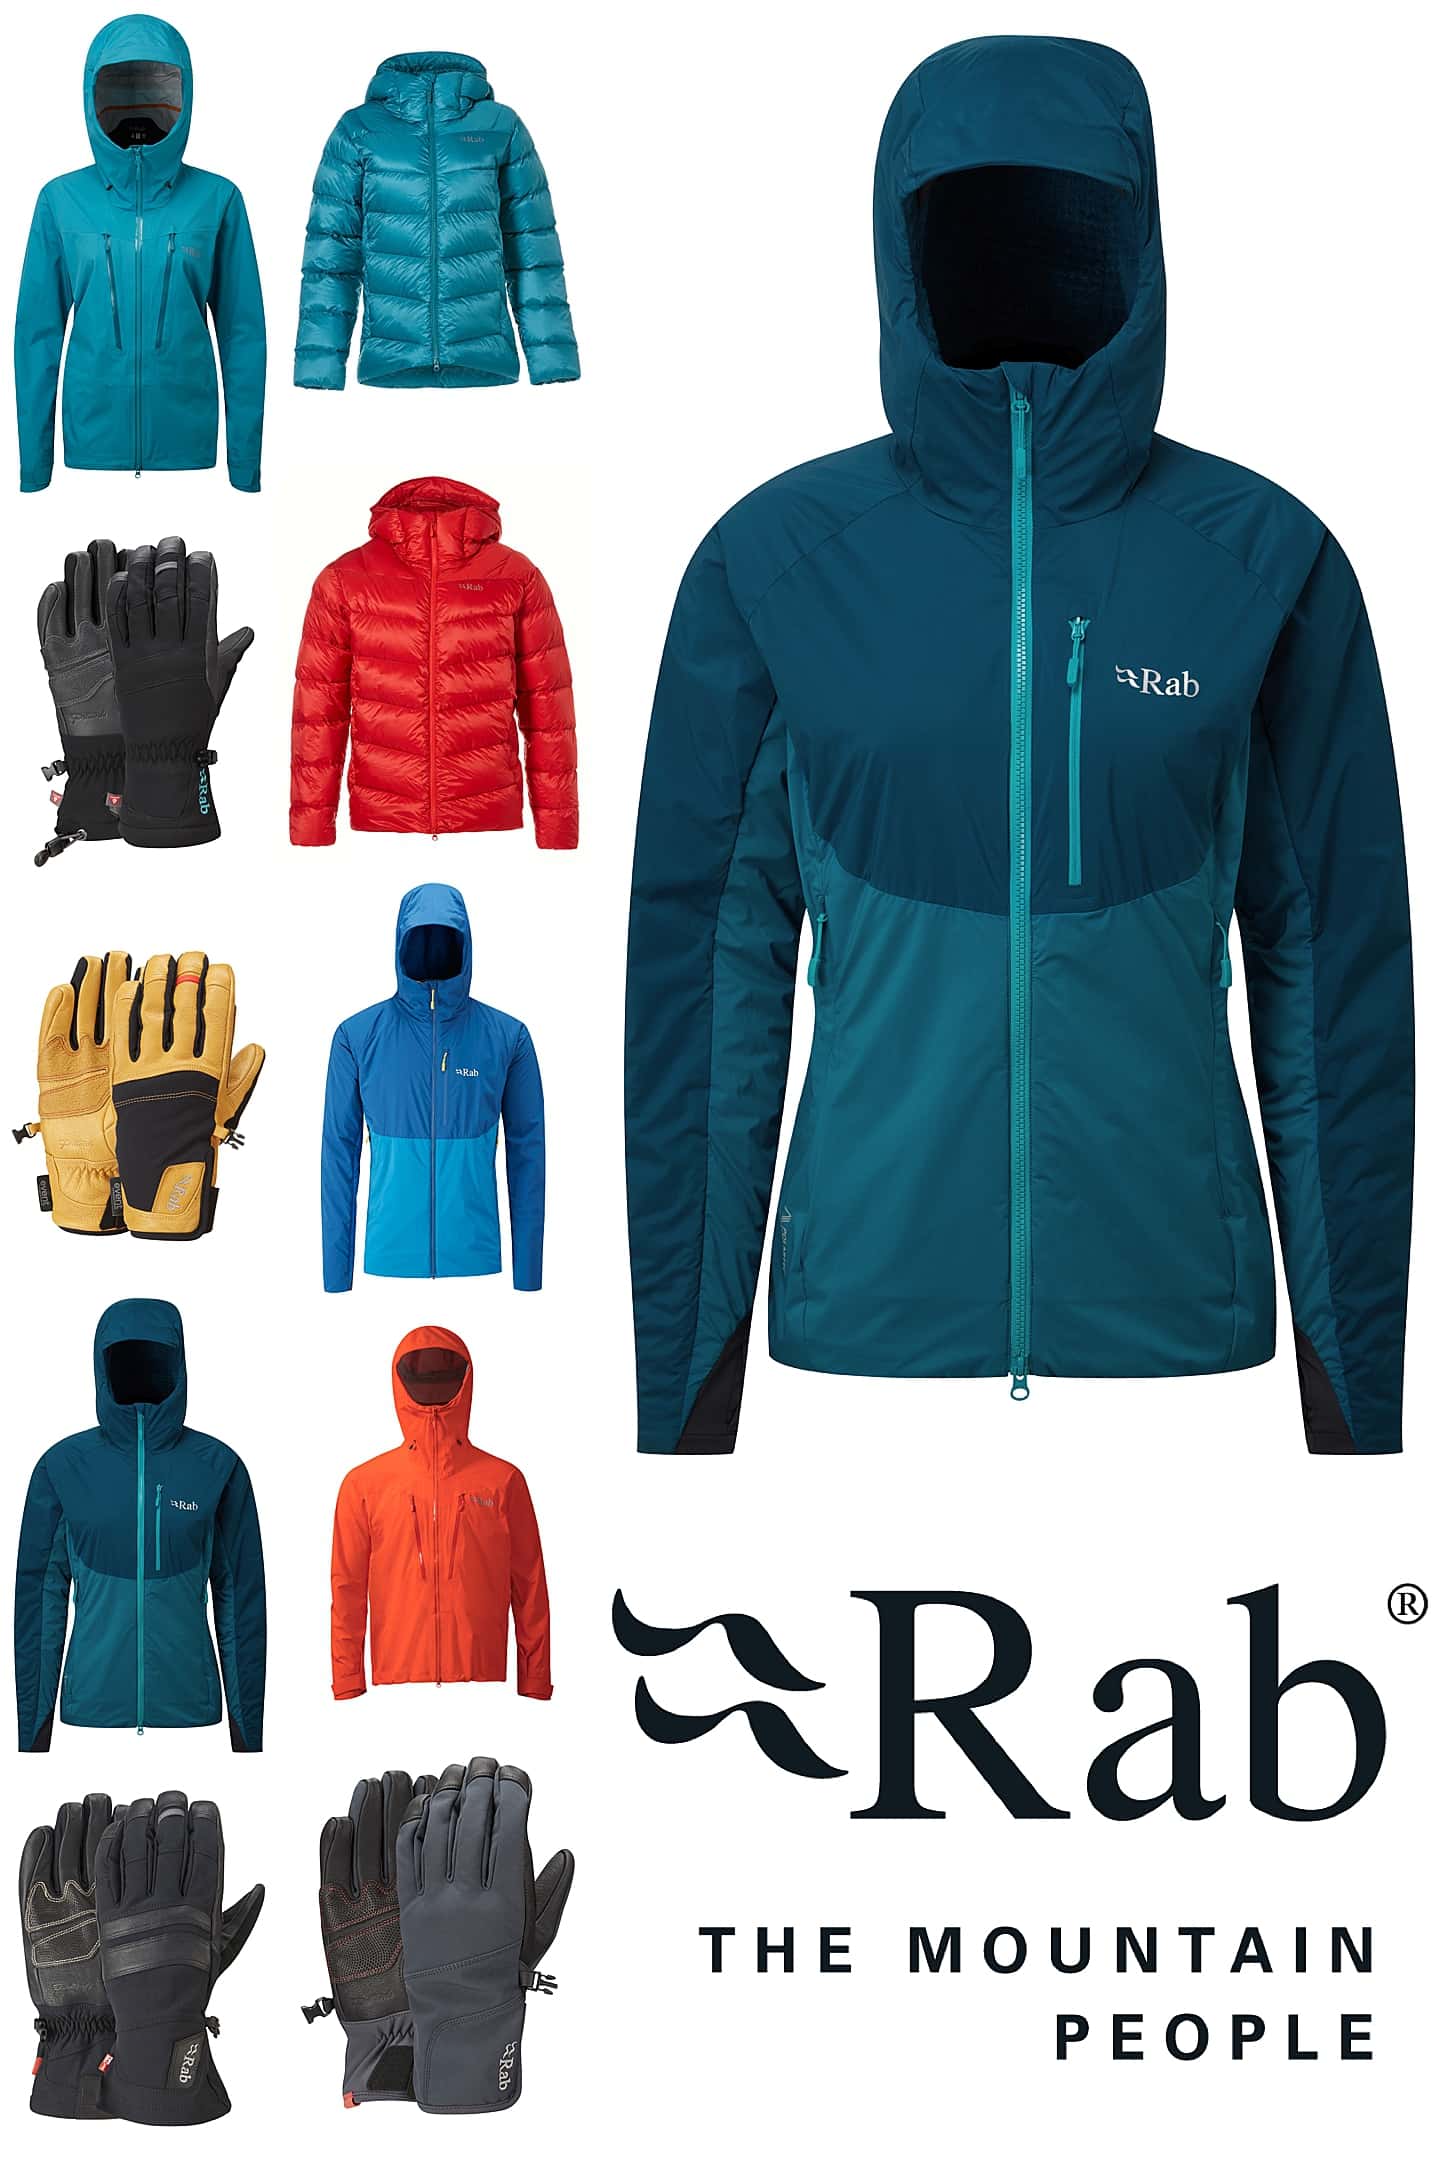 The Rab Alpha Direct Women's Jacket